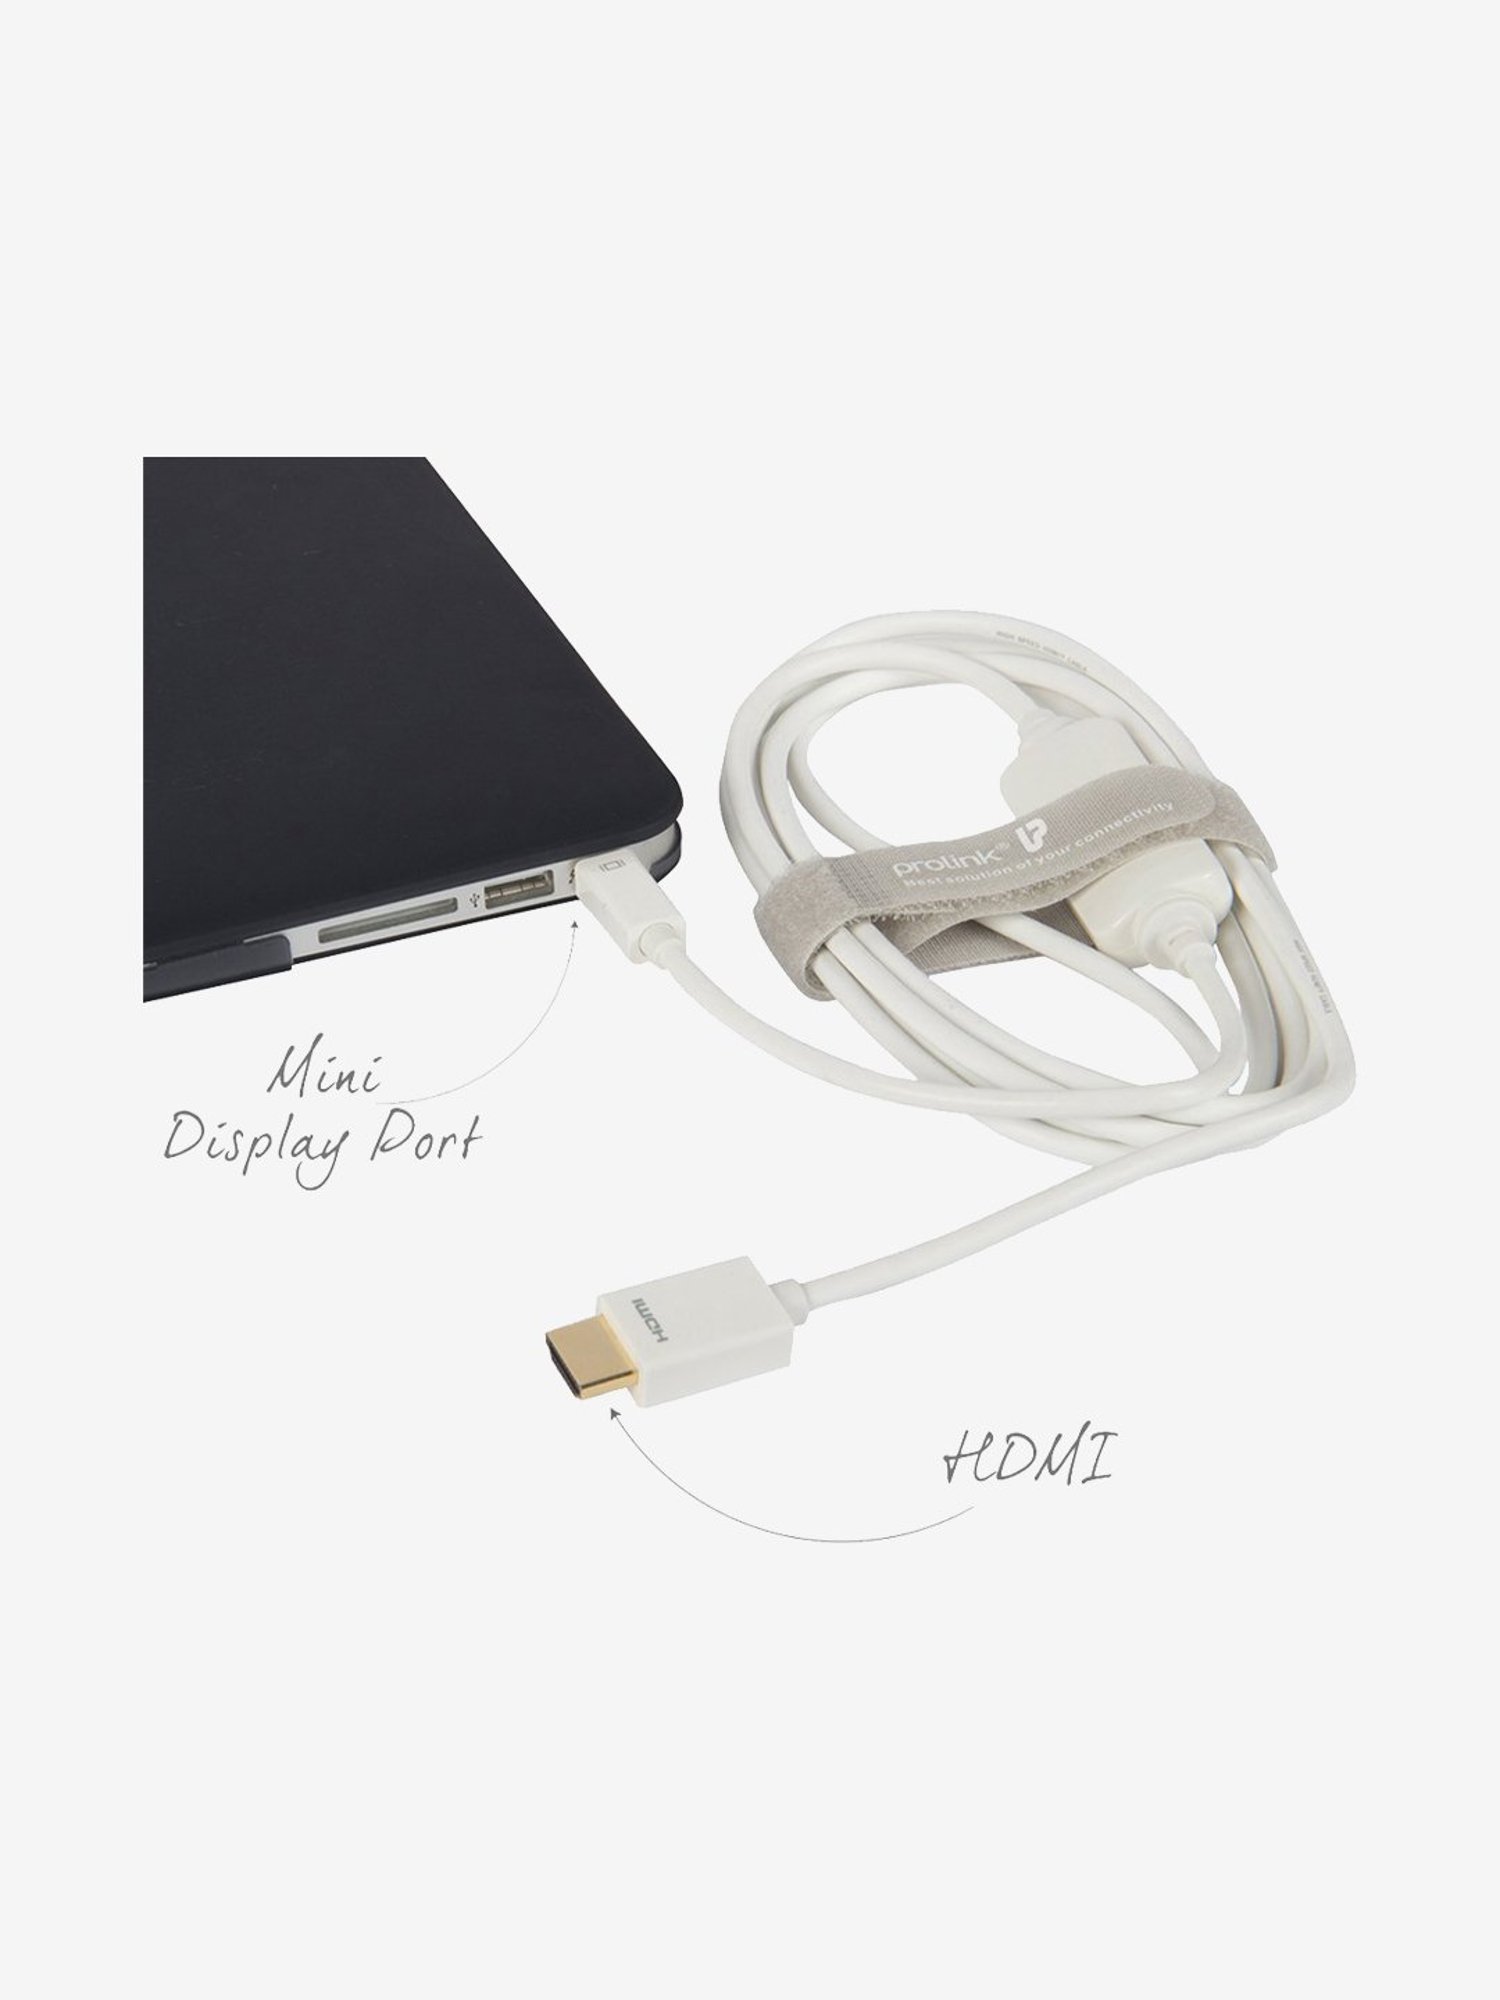 hdmi cable converter for mac